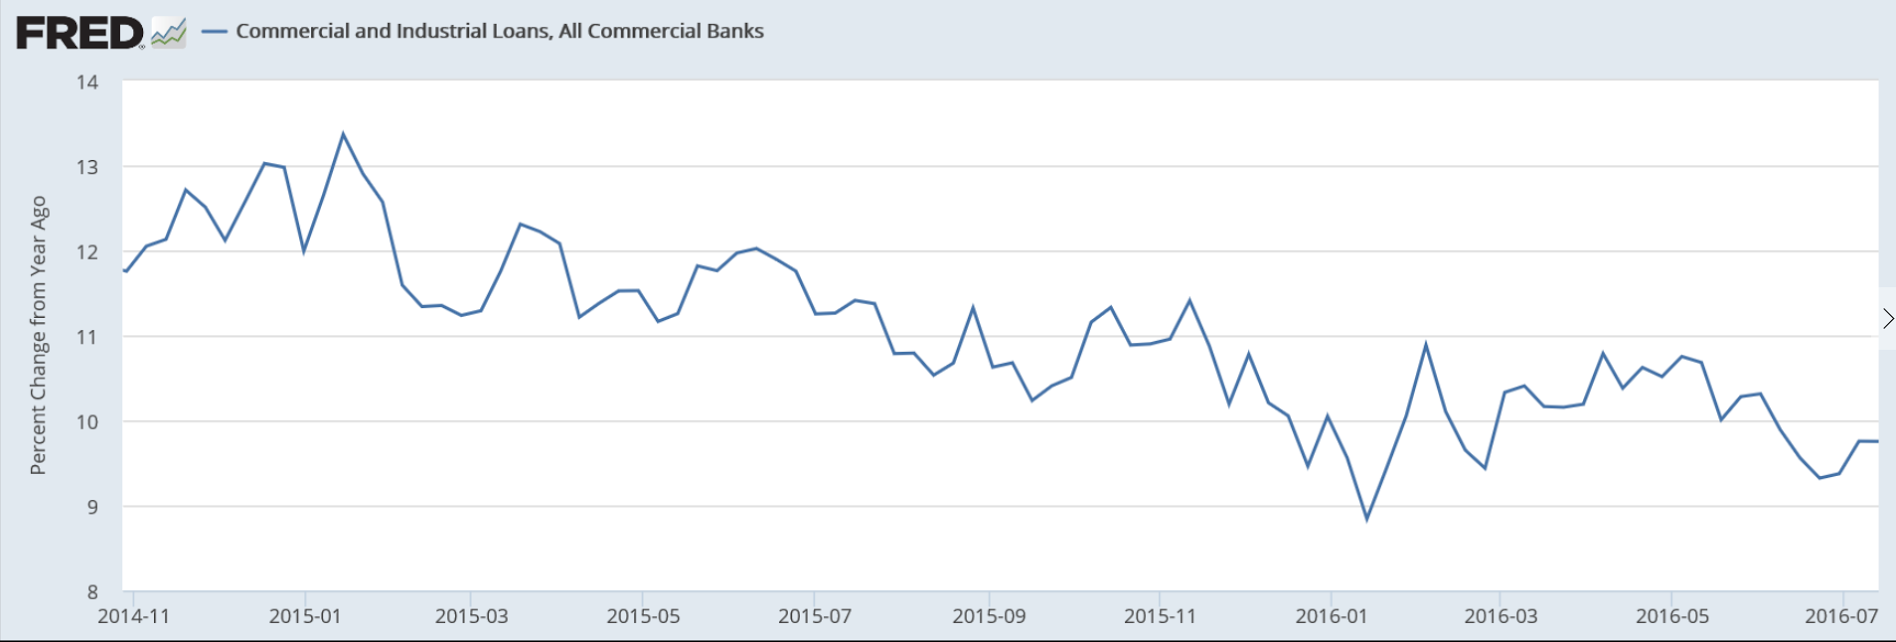 PMI, Commercial and Industrial loan growth, Japan trade